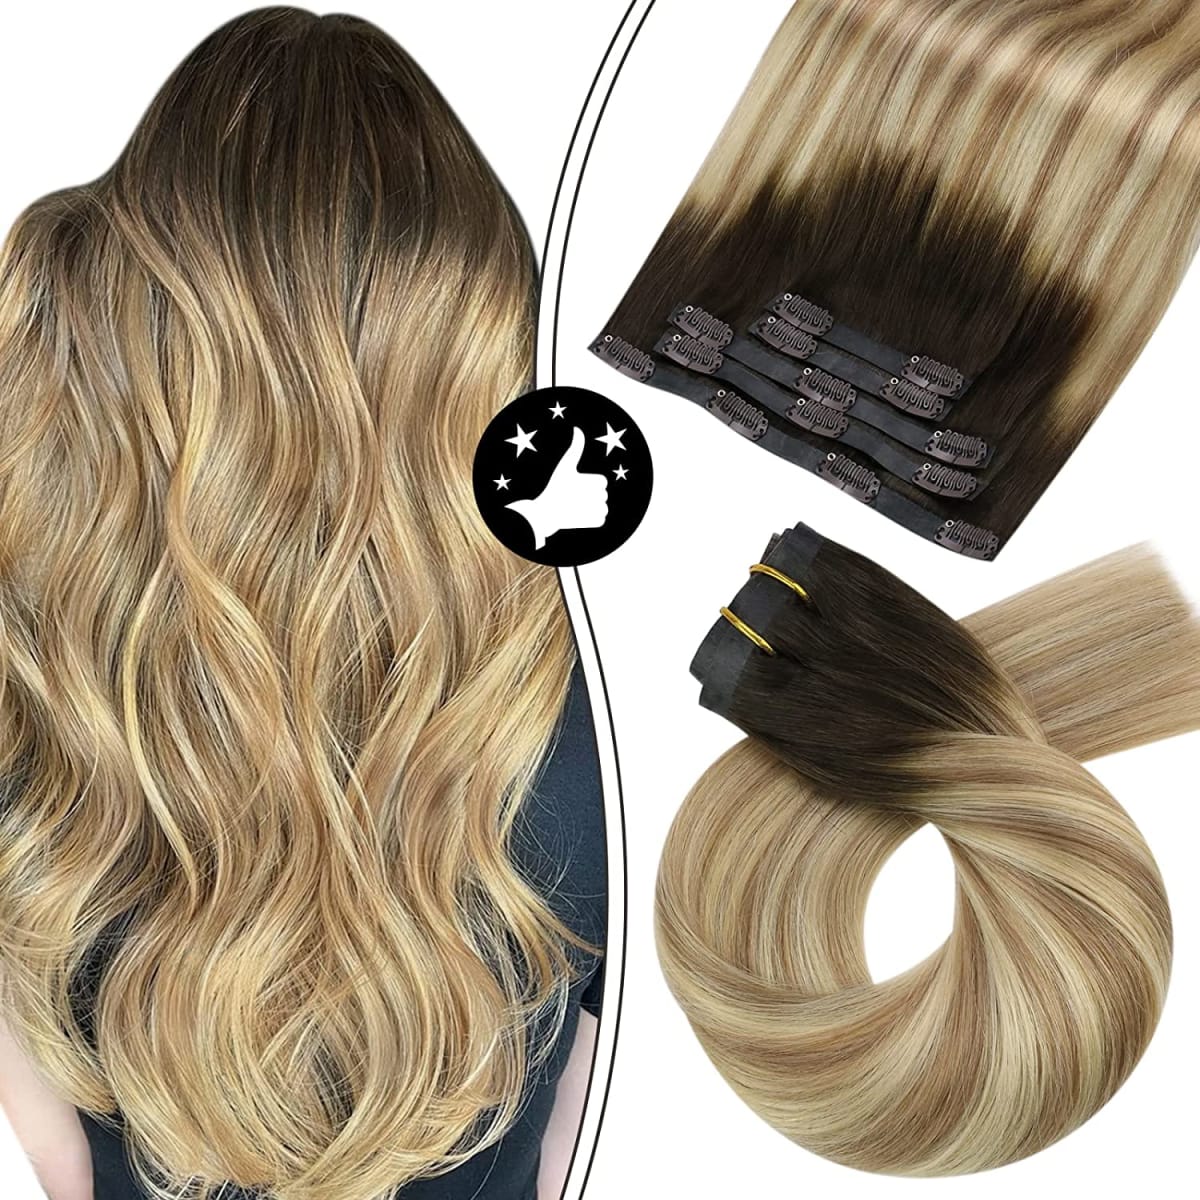 Moresoo Human Hair Extensions Clip in Balayage Hair Extensions 20inch Ultra-thin PU Weft Hair Extensions Color #3/8/22 Real Remy Sliky Hair Seamless Clip in Hair Extensions 7Pieces/120Grams